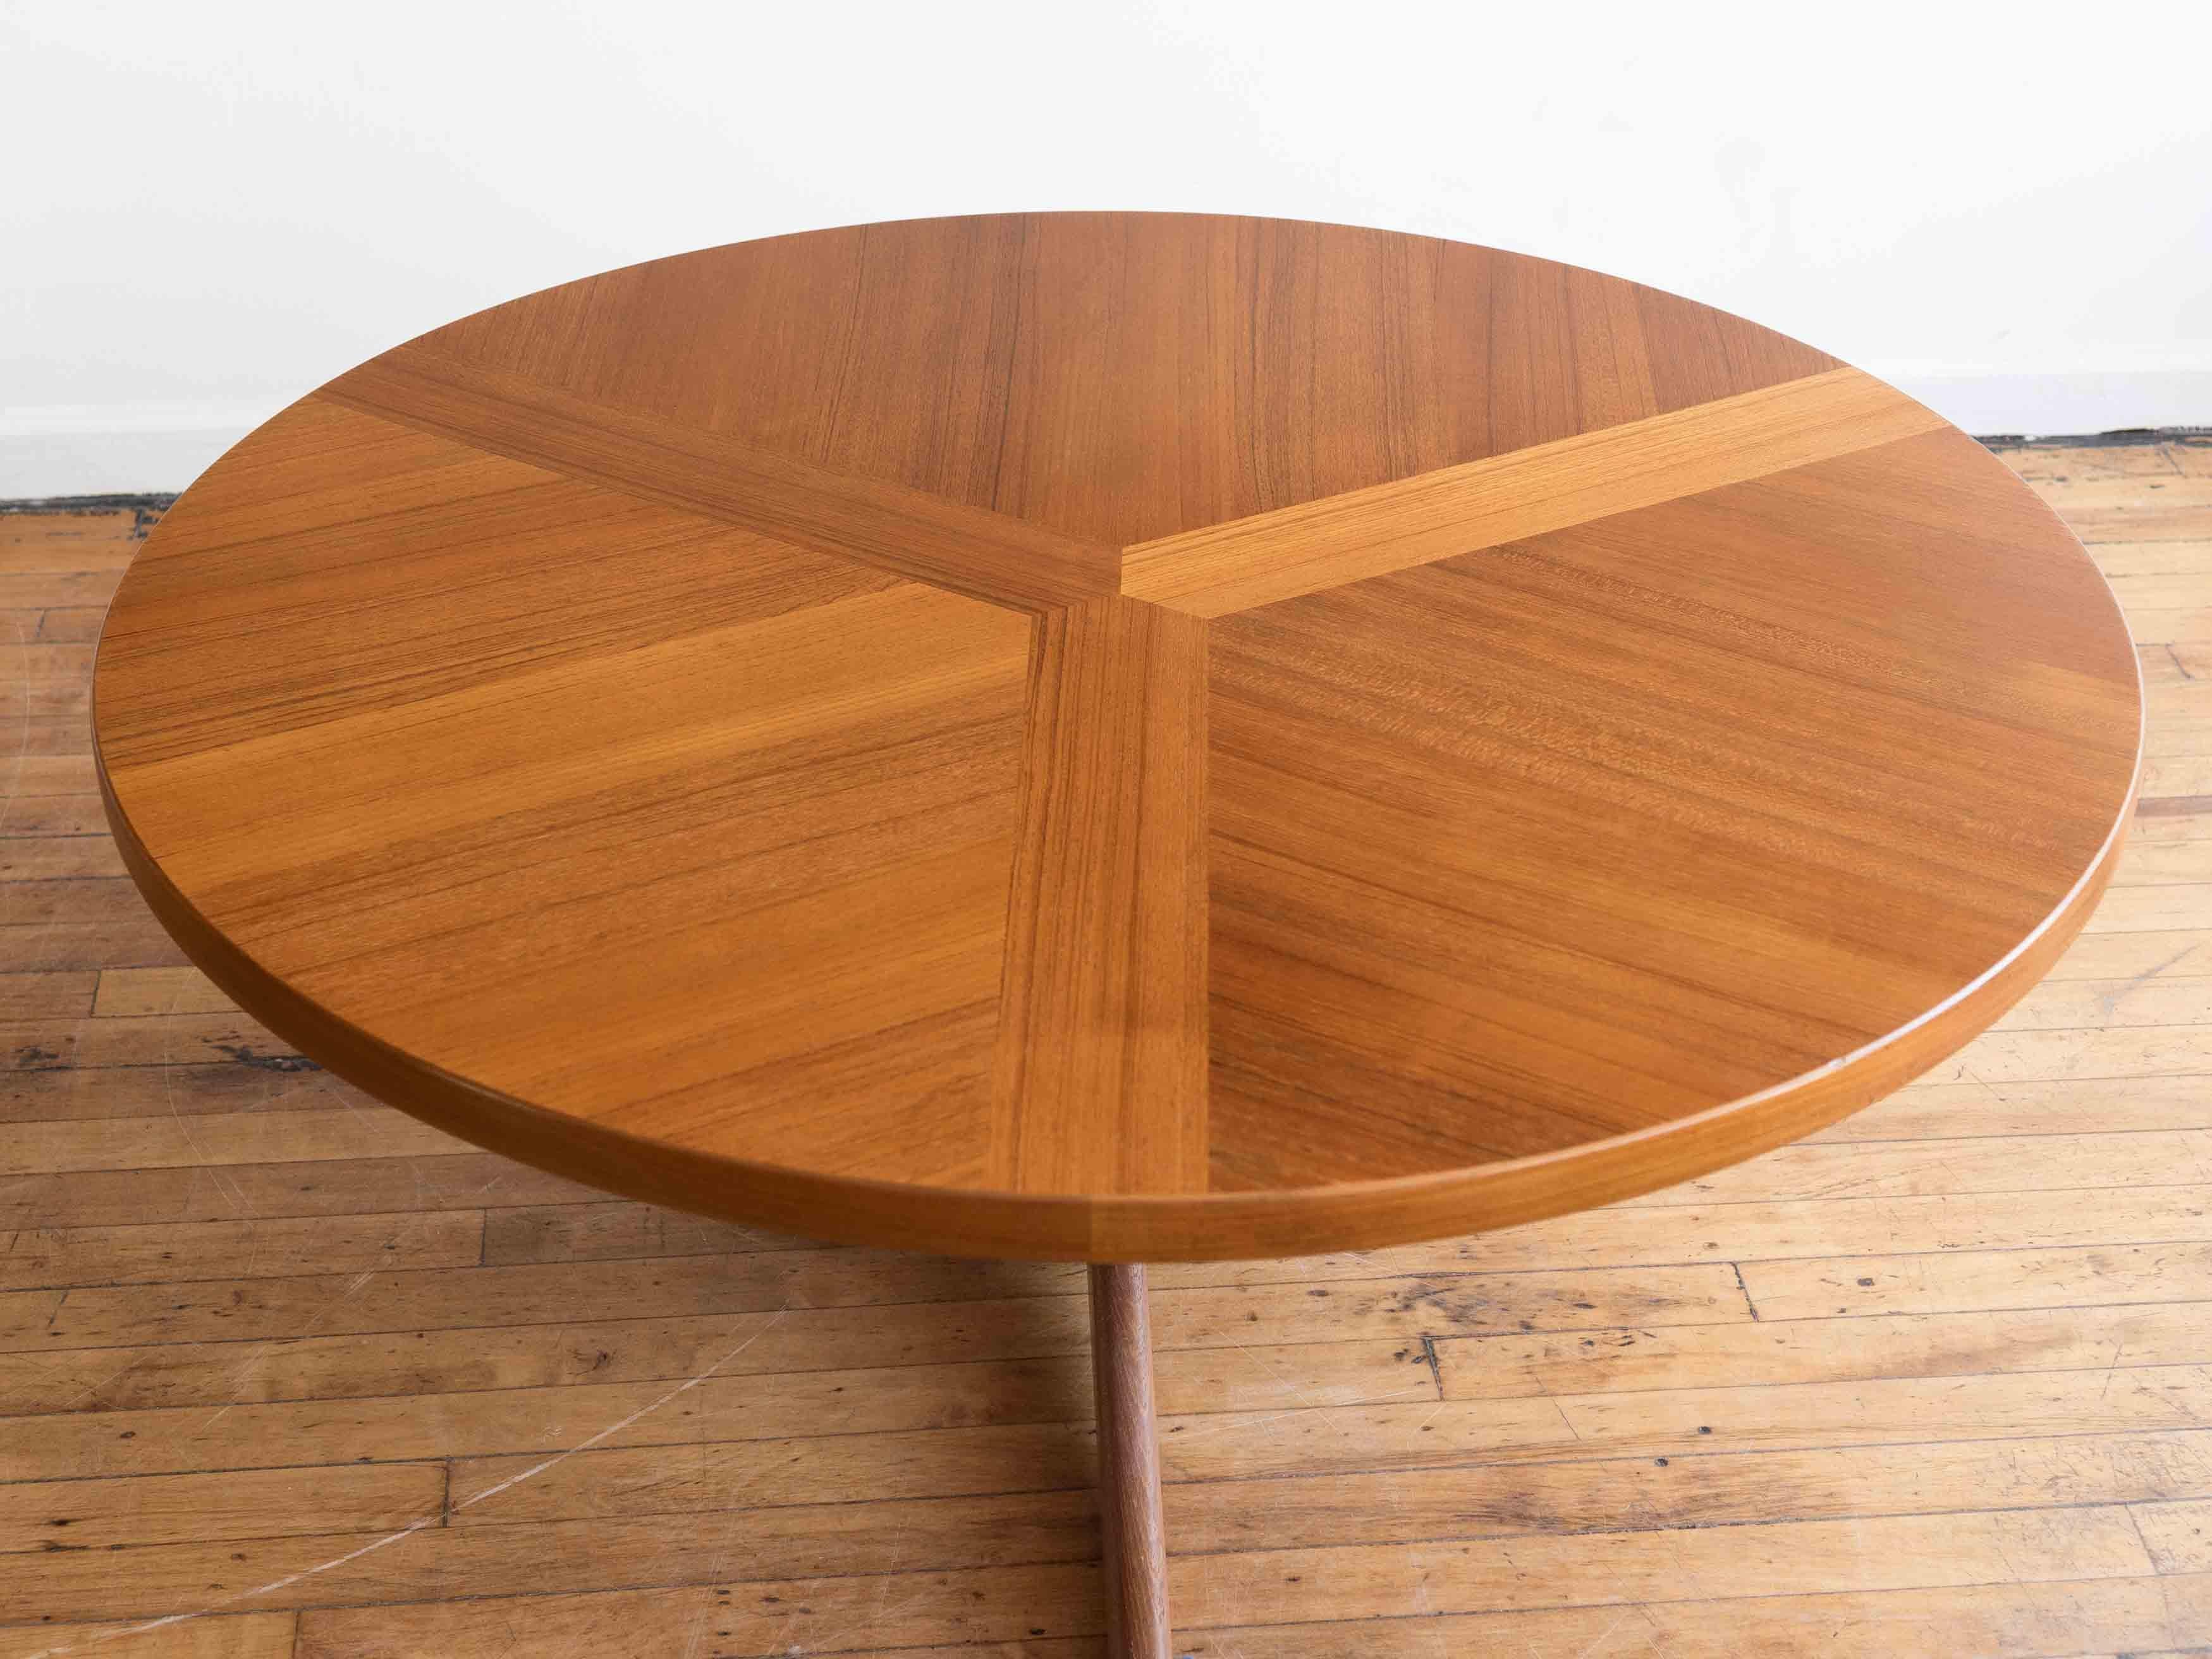 Vintage Mid Century Danish Teak Round Coffee Table with Floating Pedestal Base In Good Condition For Sale In Chicago, IL